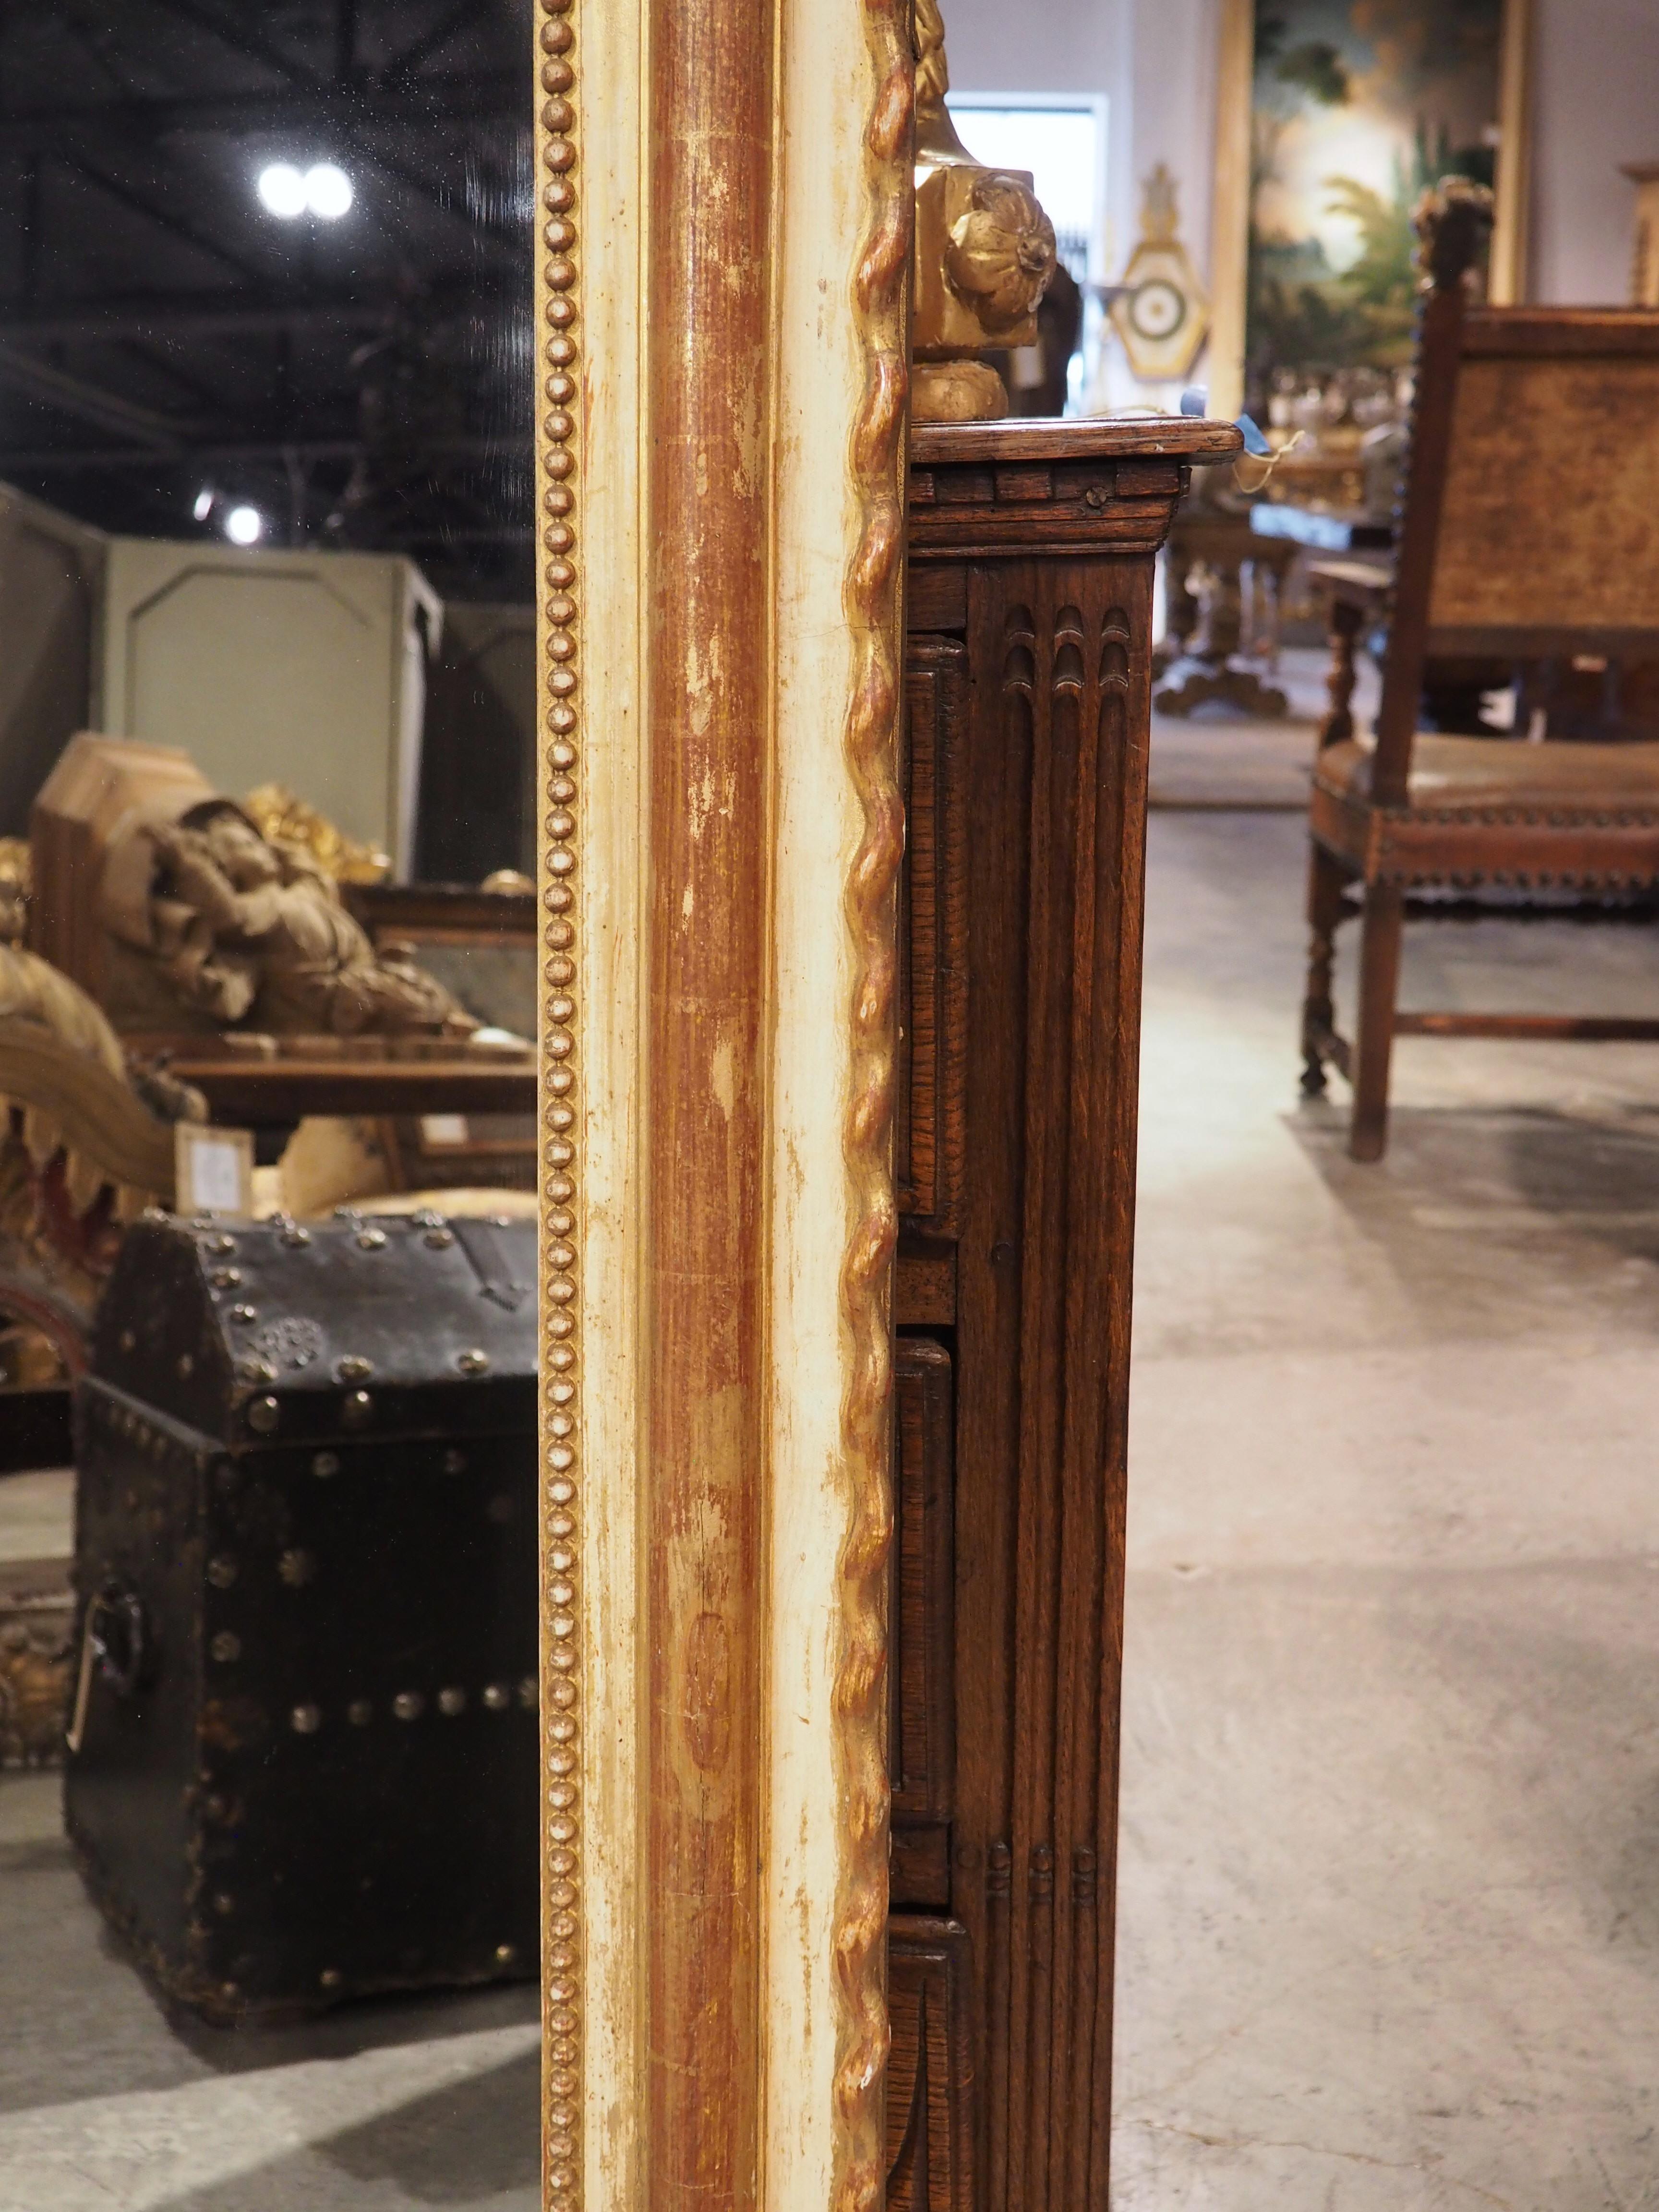 An imaginative rendering of a timeless piece of furniture, this painted and gilt Louis Philippe-style mirror has added character thanks to the hand-carved scalloped edges. Louis Philippe mirrors typically have clean lines and subtle embellishments